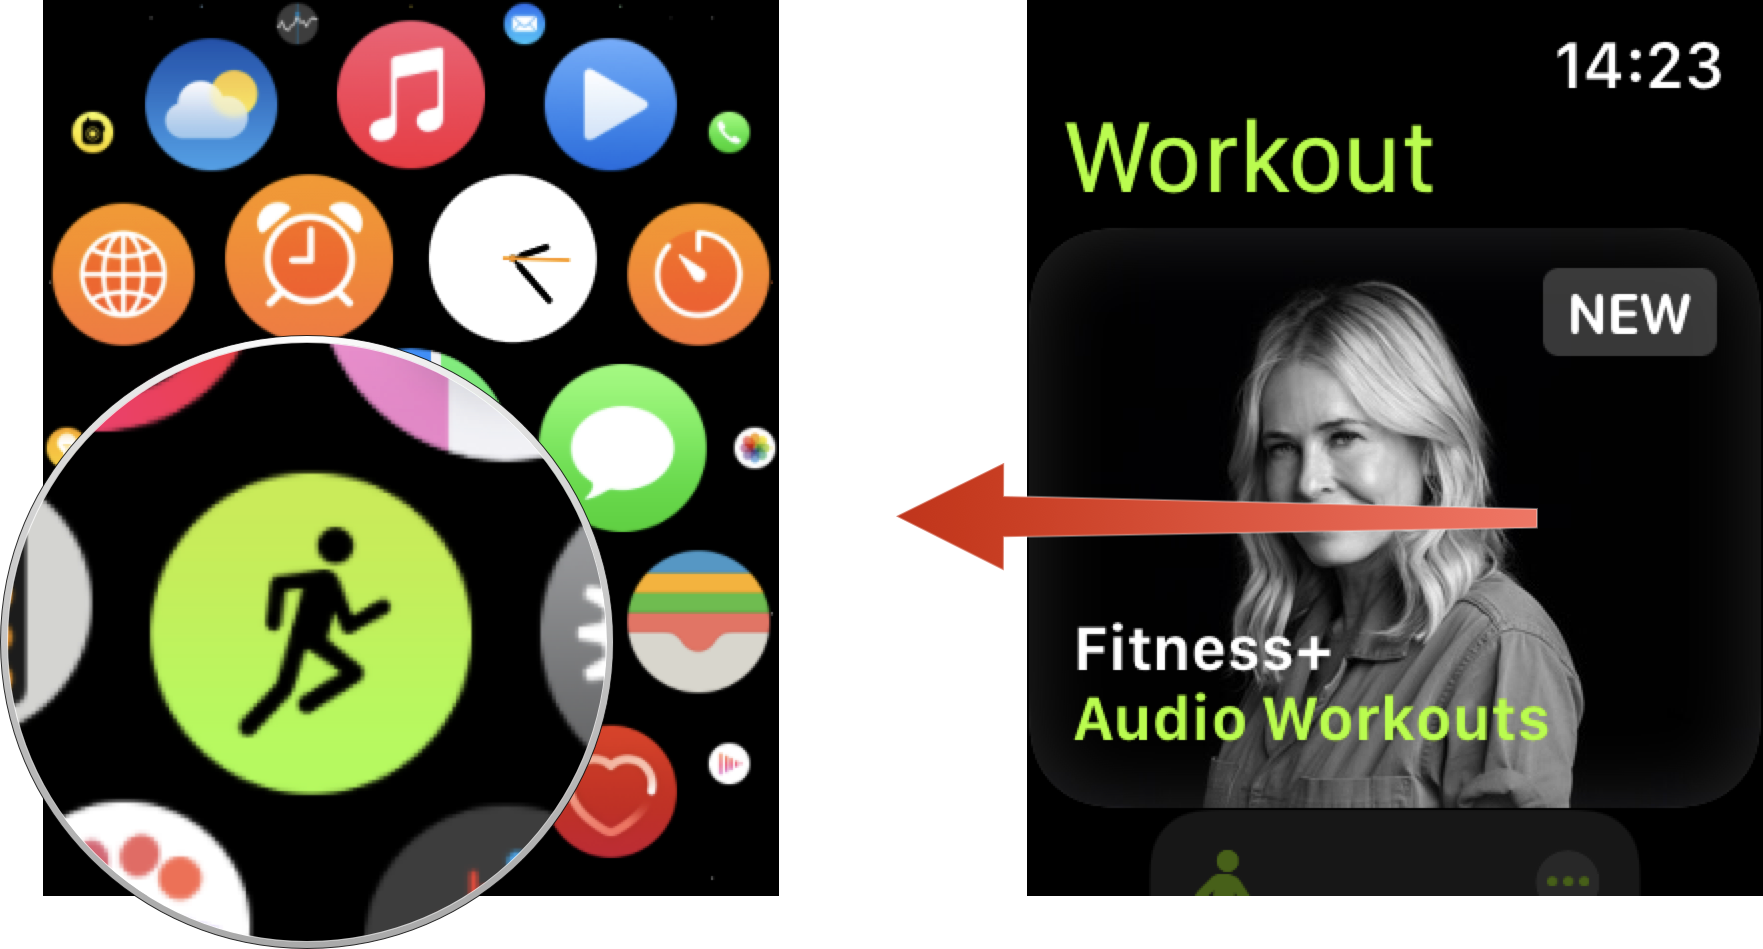 Remove Time to Walk and Time to Run workouts: Open Workouts app, swipe from right to left on Audio Workouts.